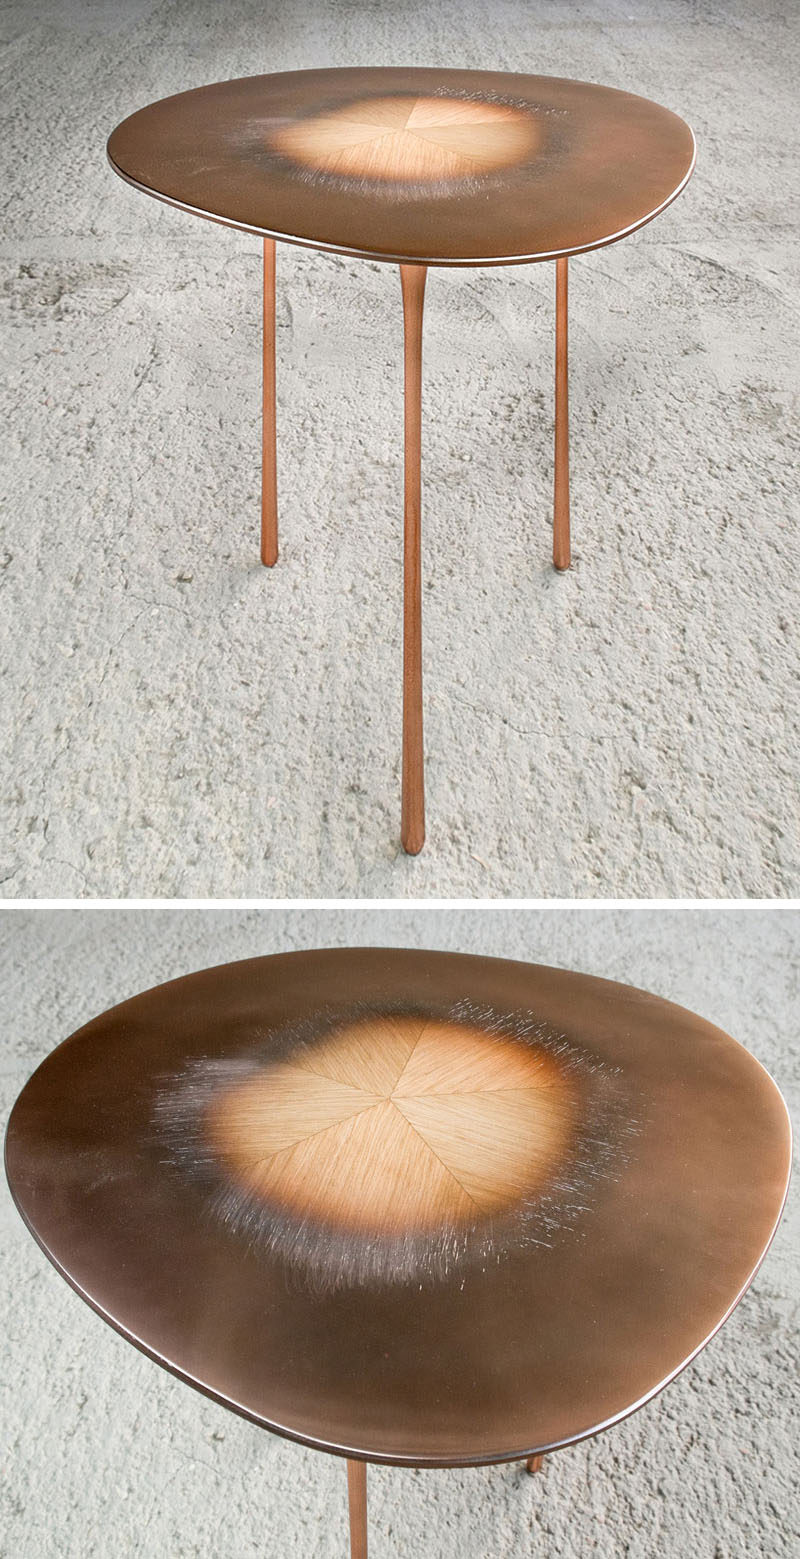 Design studio UUfie, have created The Echo Series, a collection of modern tables that have been designed using a technique of combining hardwood and metal.